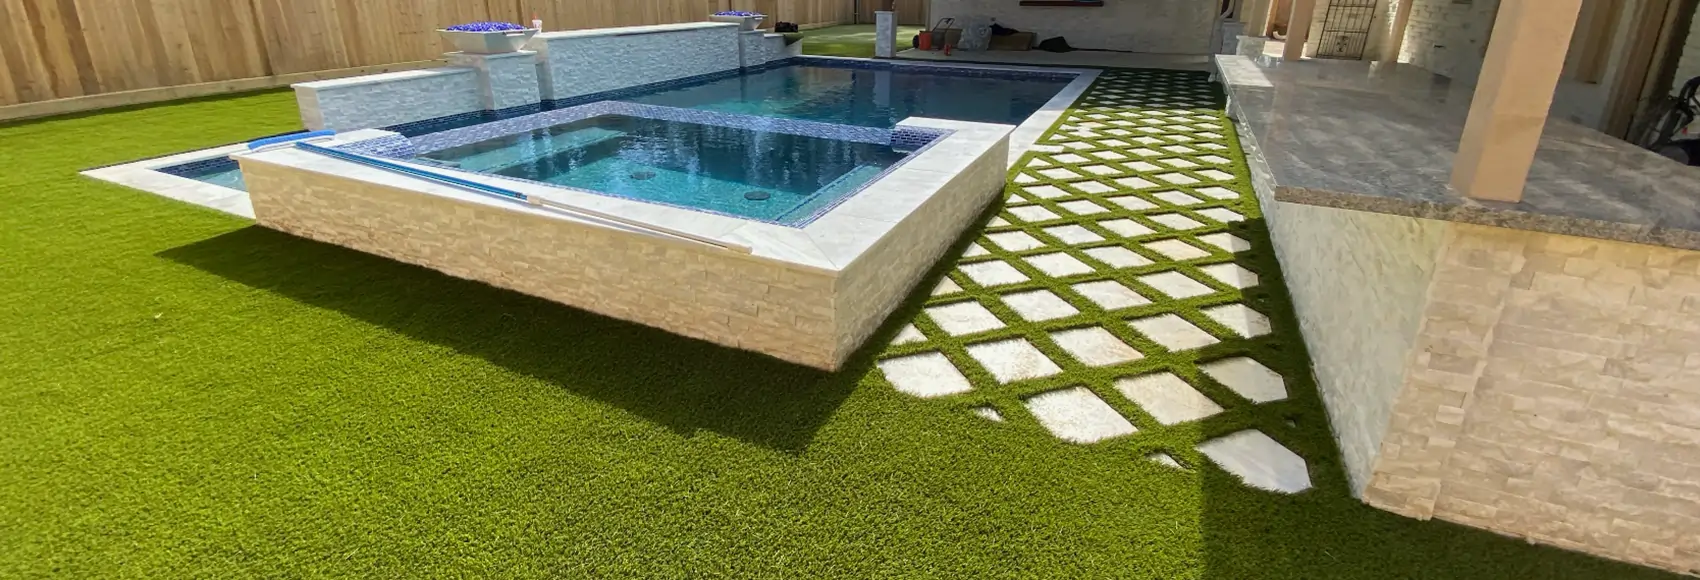 Artificial grass backyard from SYNLawn